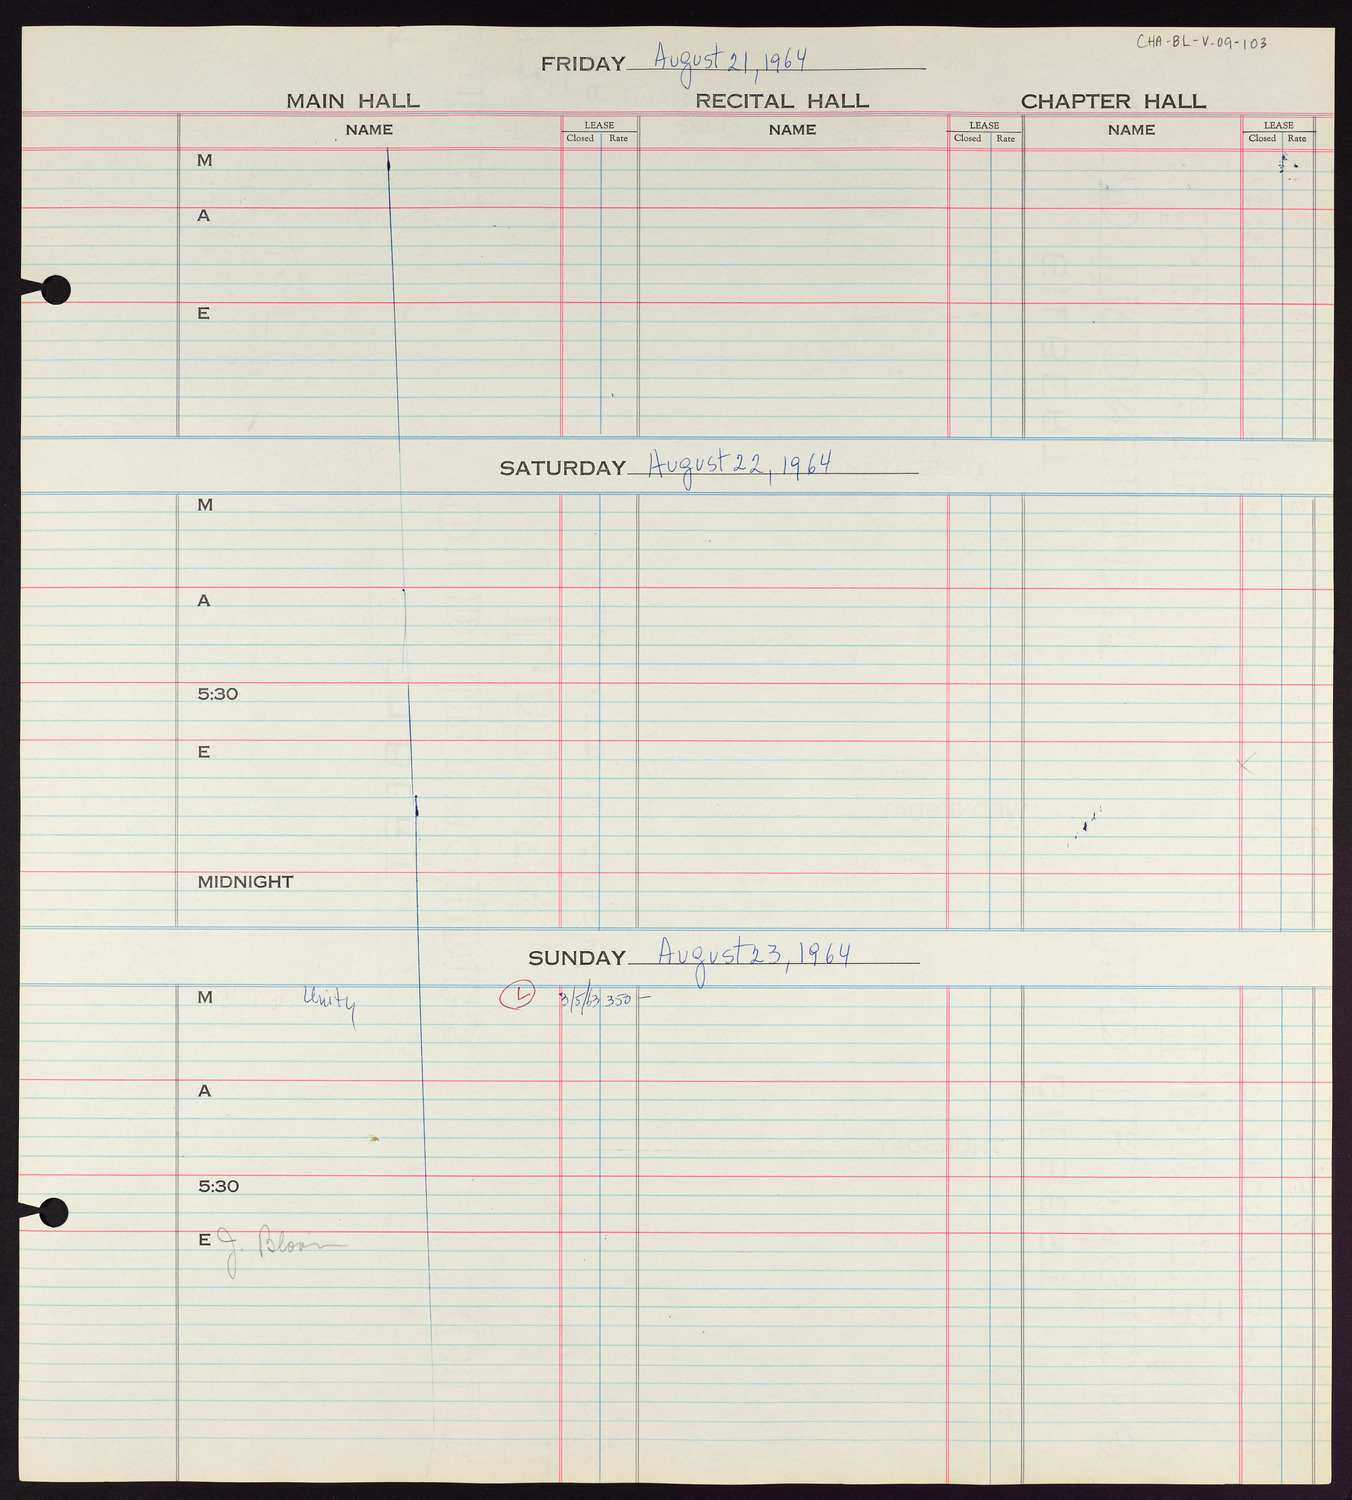 Carnegie Hall Booking Ledger, volume 9, page 103